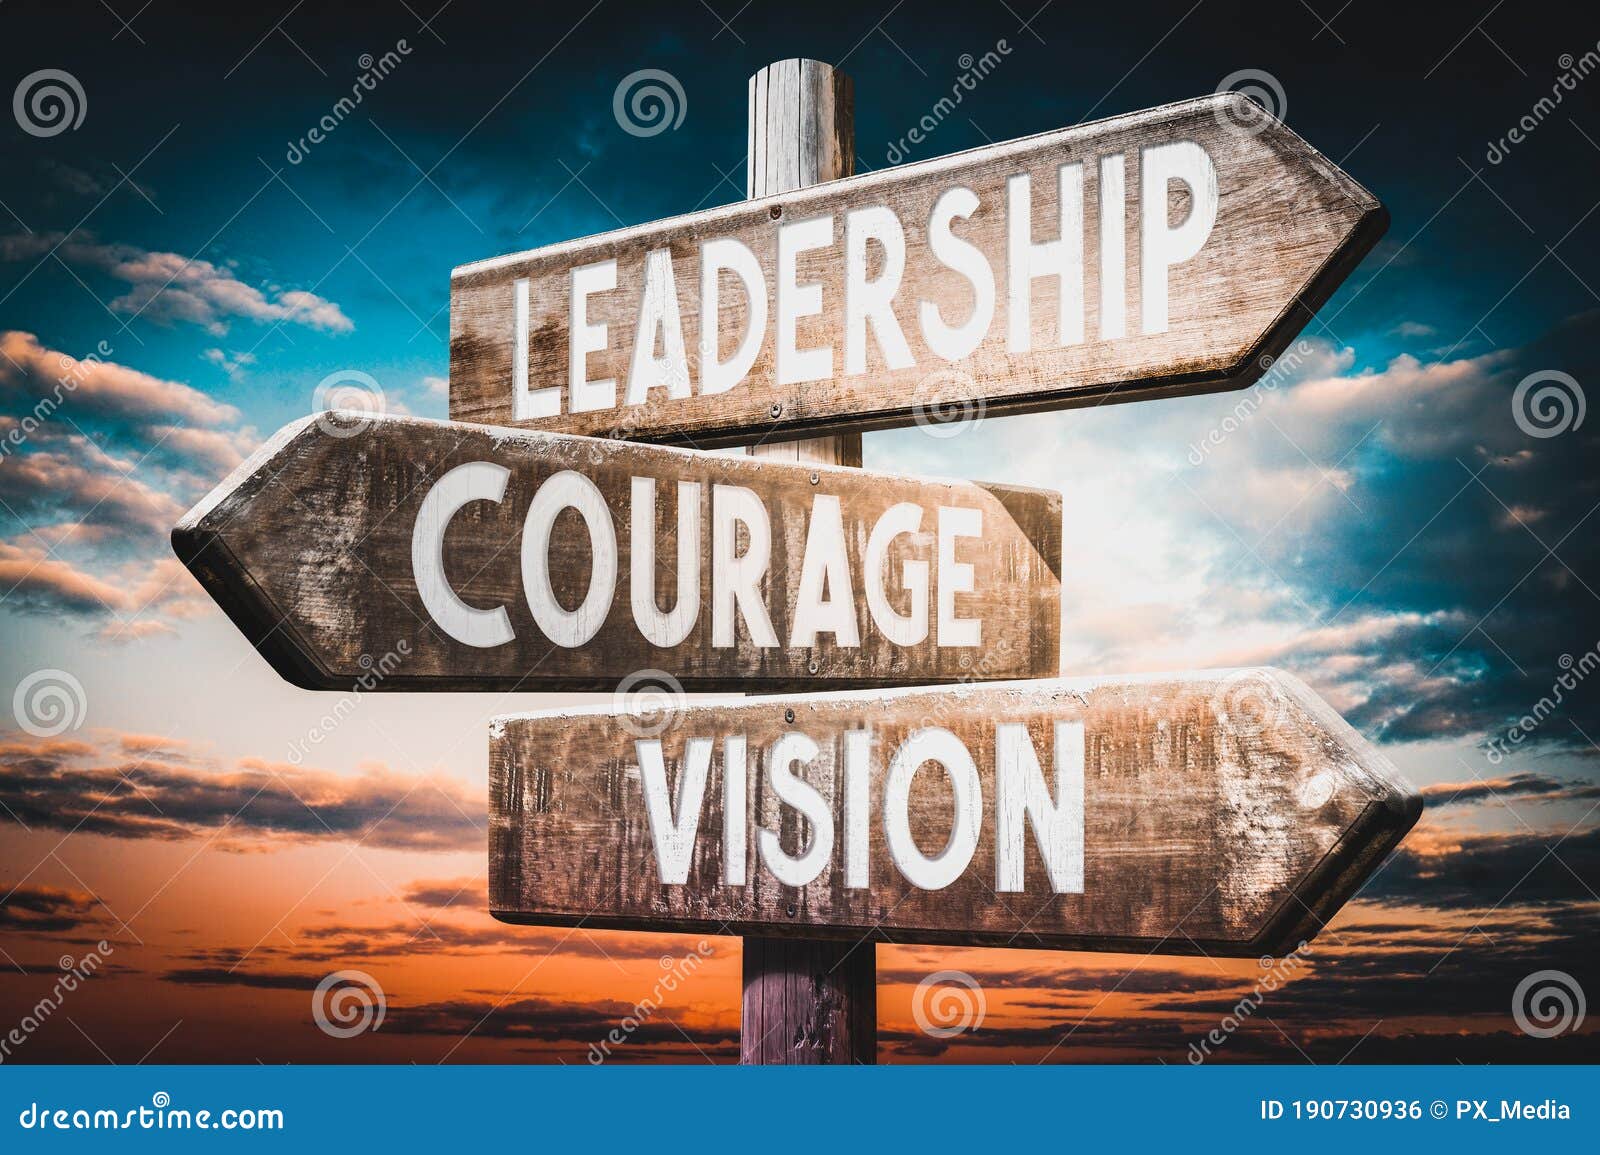 leadership, courage, vision - wooden signpost, roadsign with three arrows